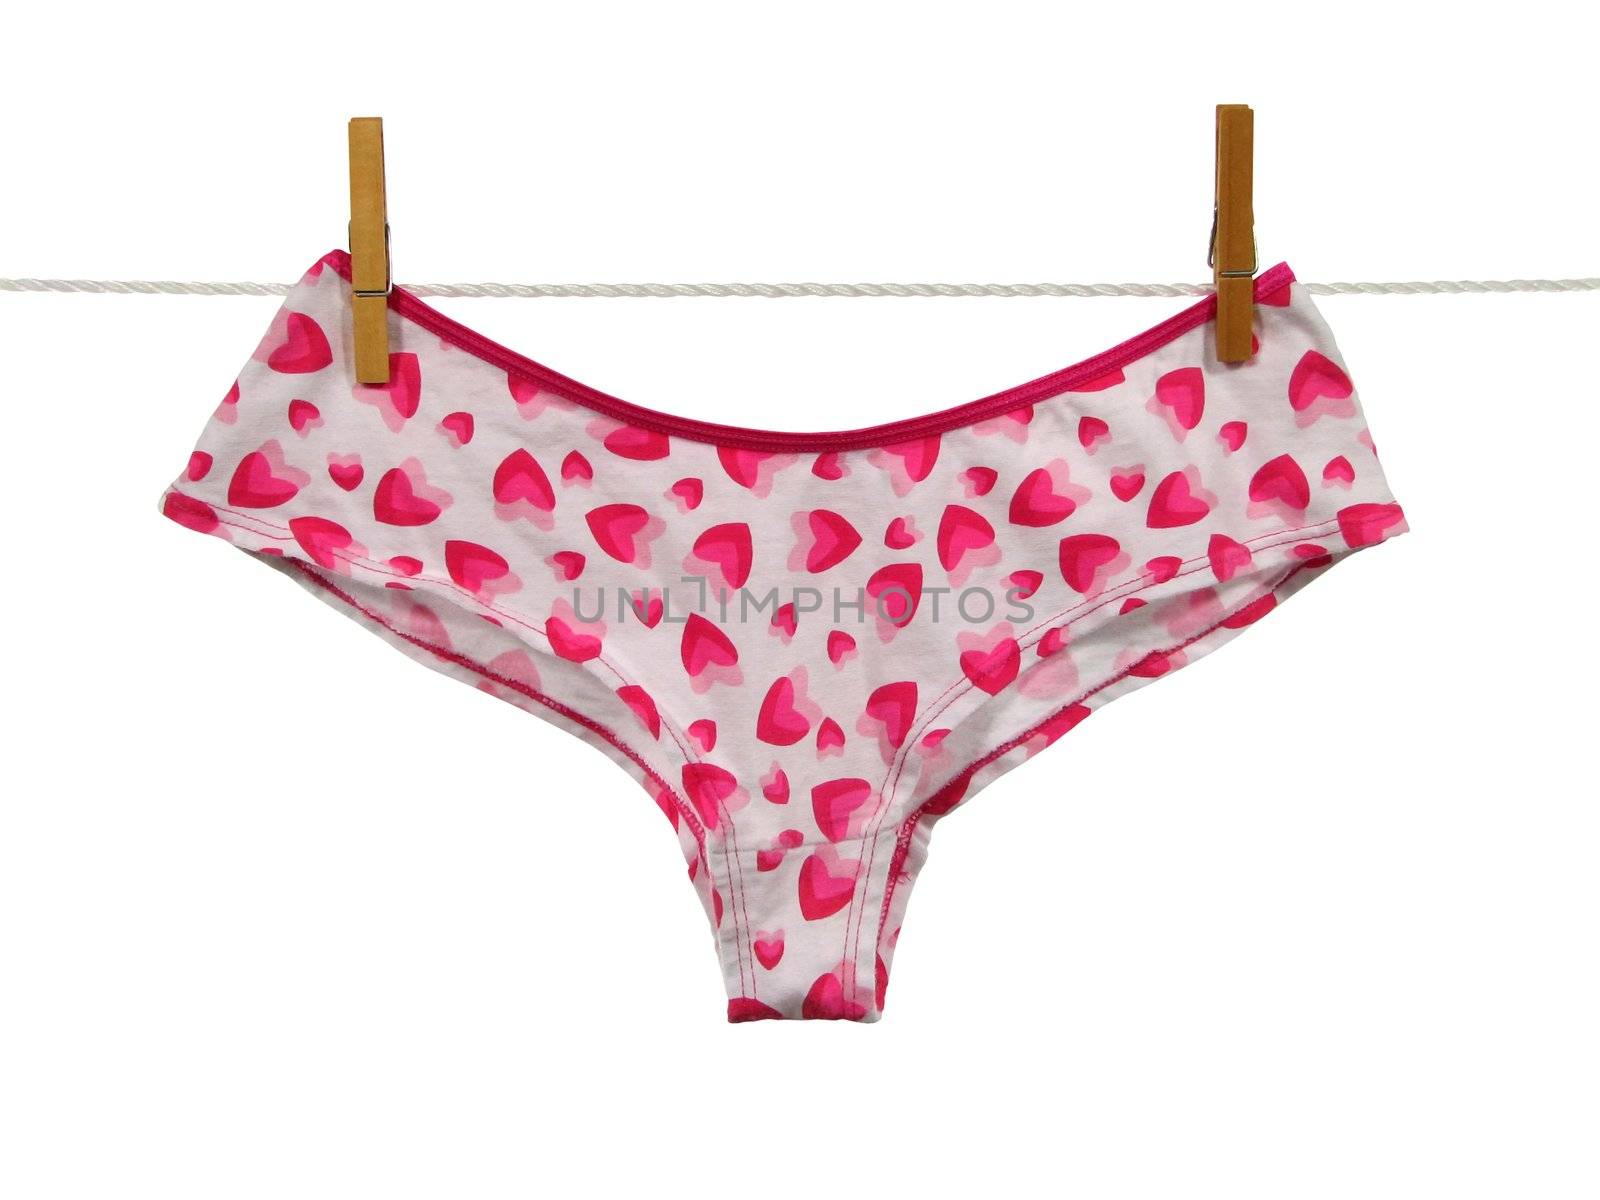 Valentine panties on a clothes line (+clipping path) by anikasalsera